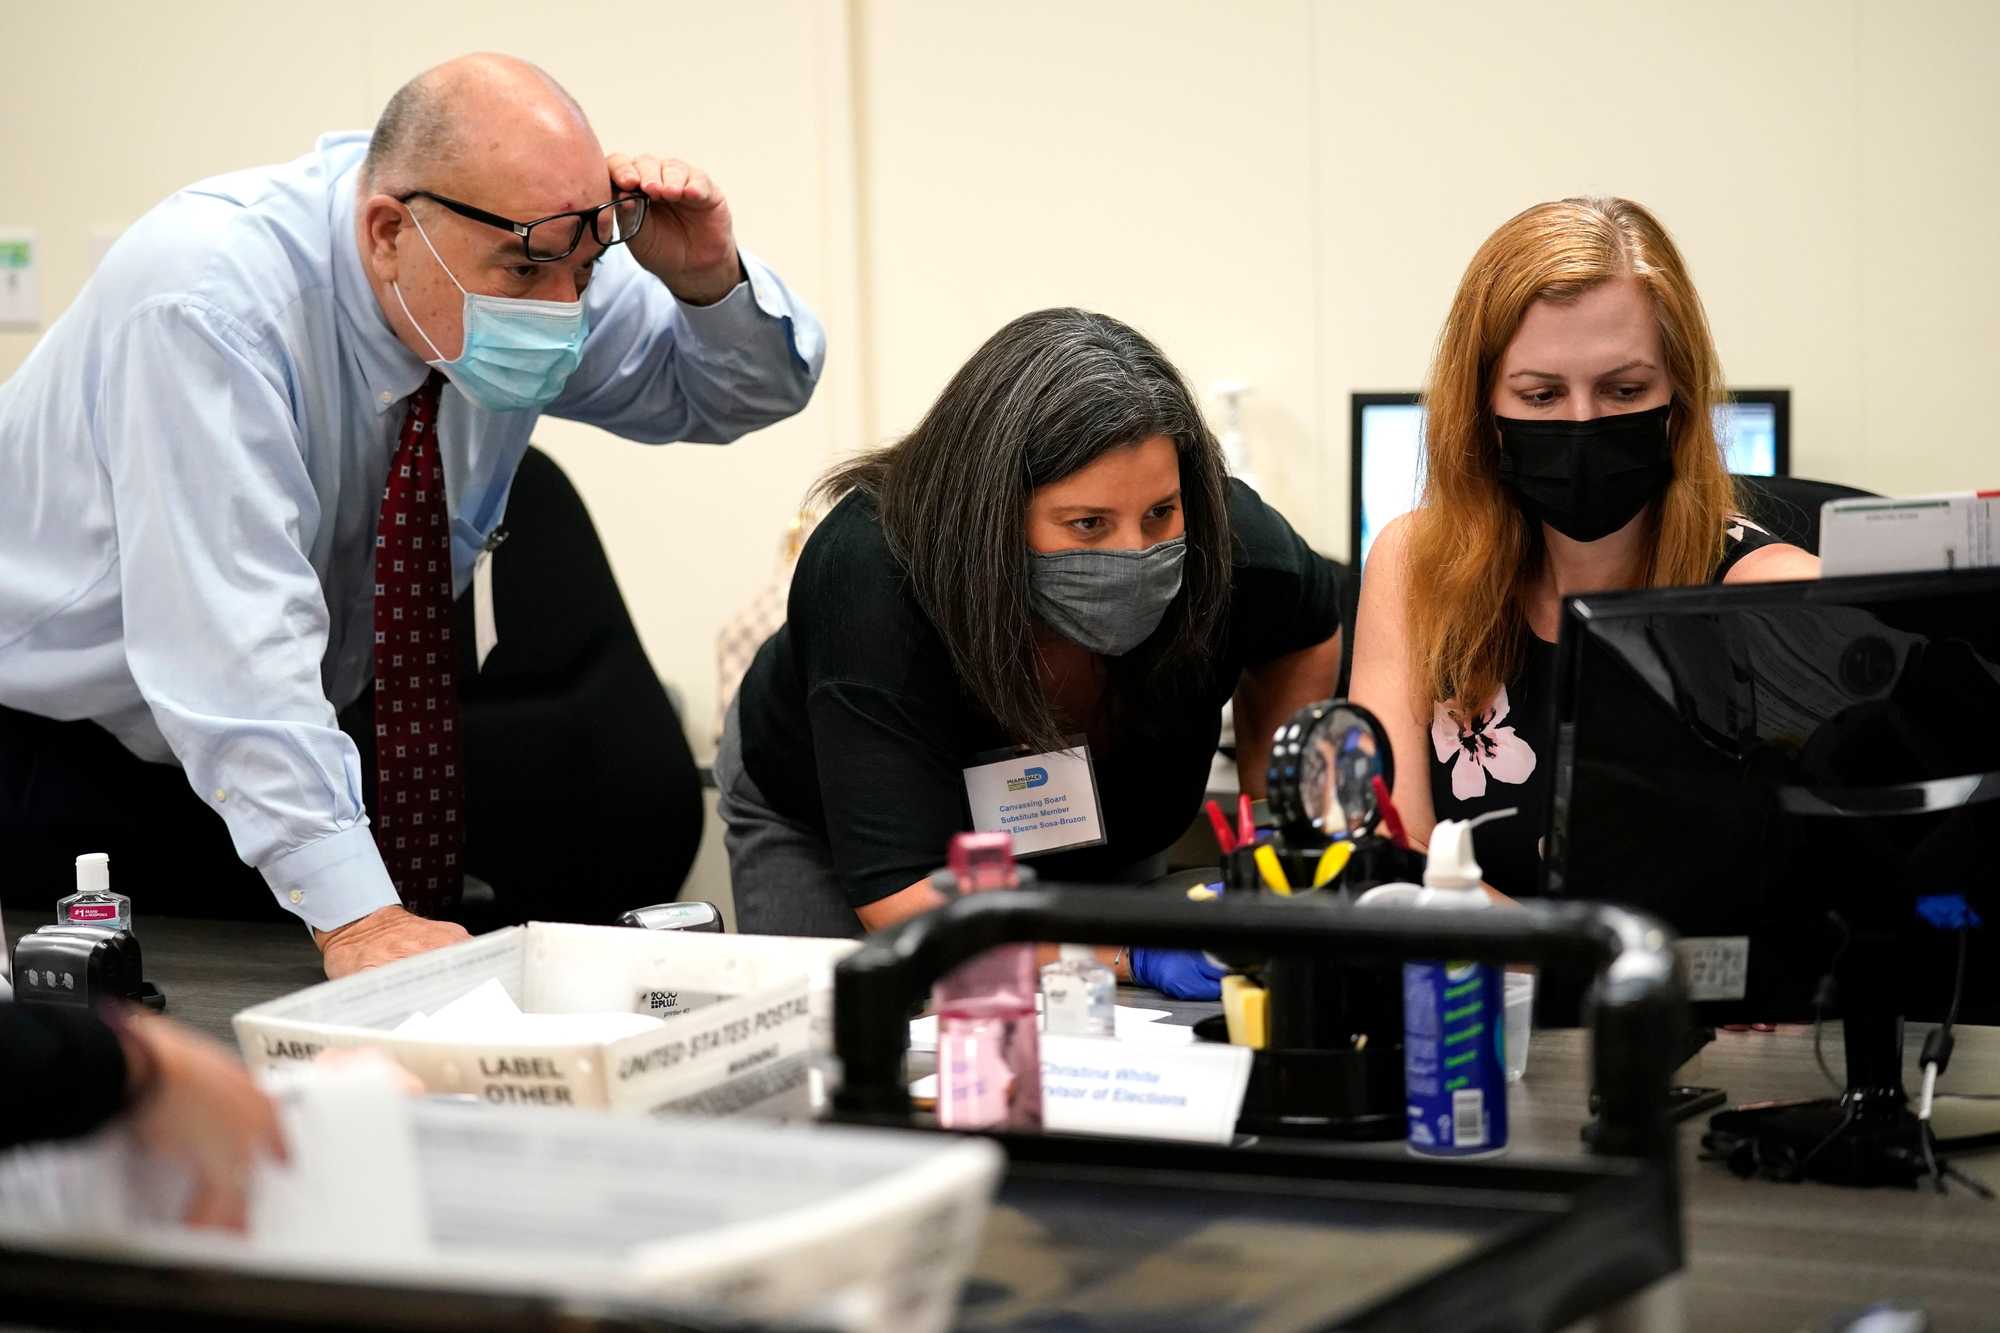 Miami-Dade County Supervisor of Elections Christina White (right) examined signatures on vote-by-mail ballots with members of the Canvassing Board Judge Raul Cuervo (left) and Judge Betsy Alvarez-Zane at that county's Board of Elections in Doral, Fla. on Oct. 26, 2020.